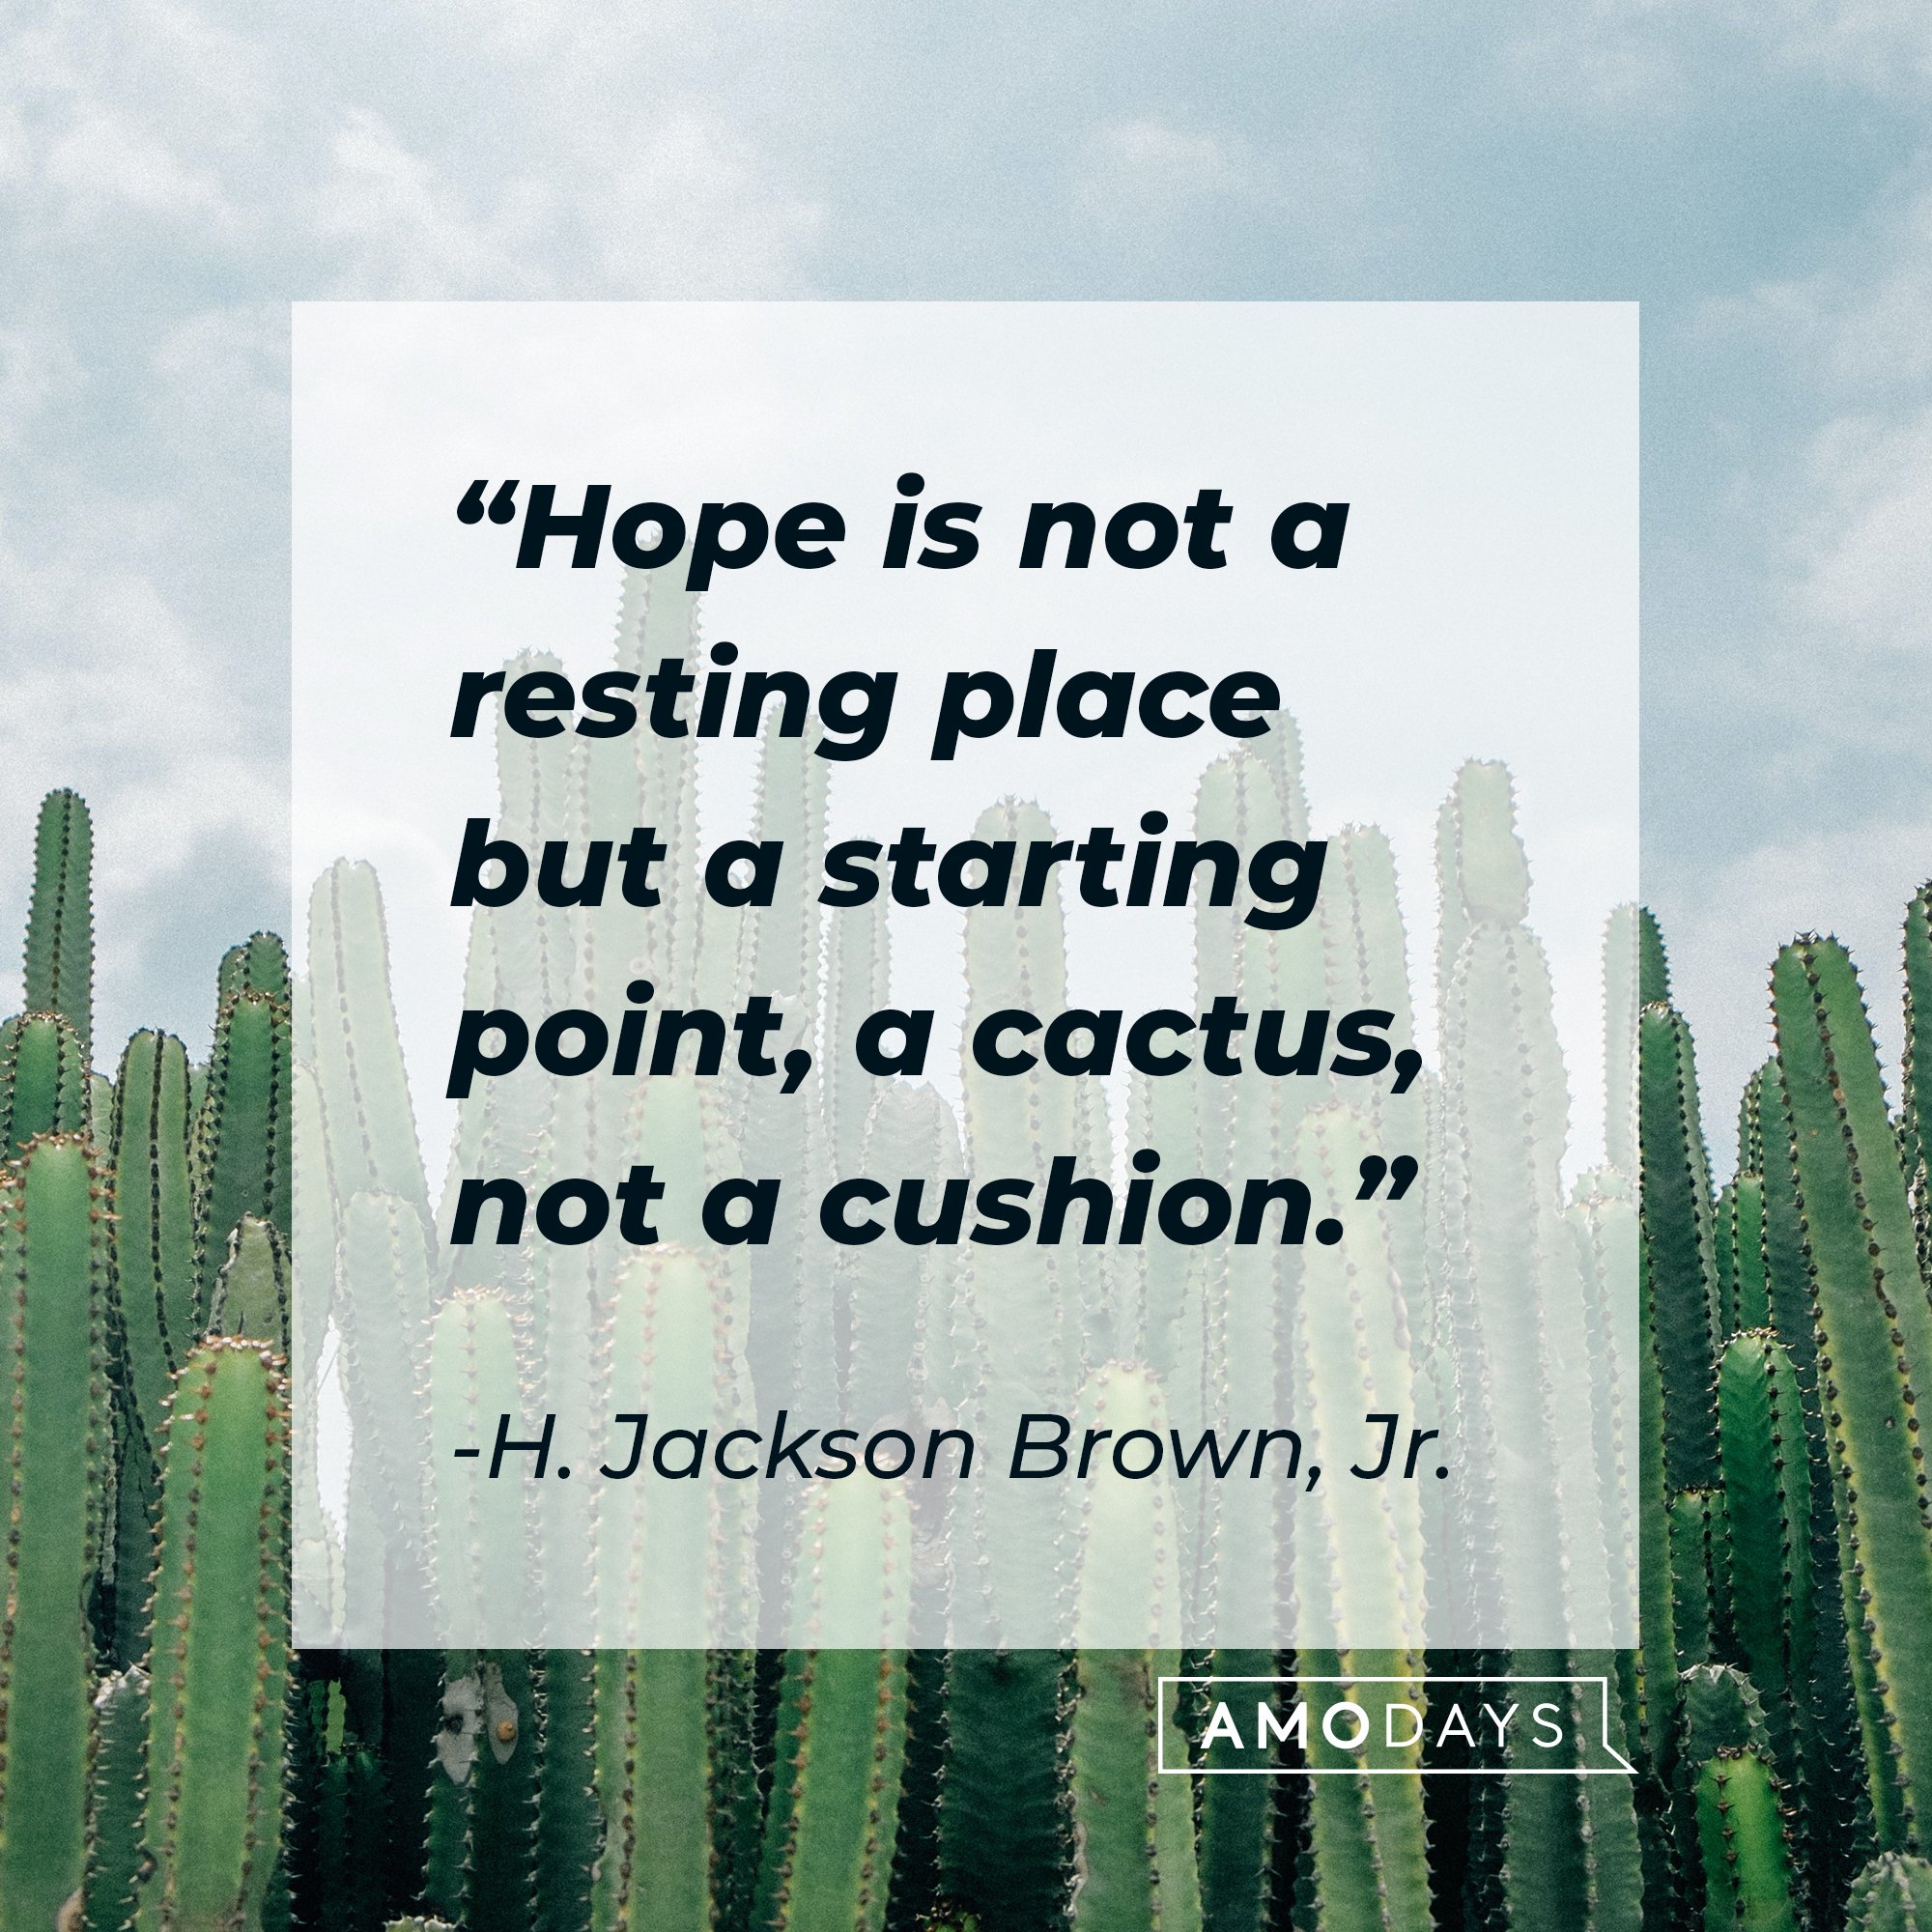 H. Jackson Brown, Jr.’s quote: "Hope is not a resting place but a starting point, a cactus, not a cushion."  | Image: AmoDays